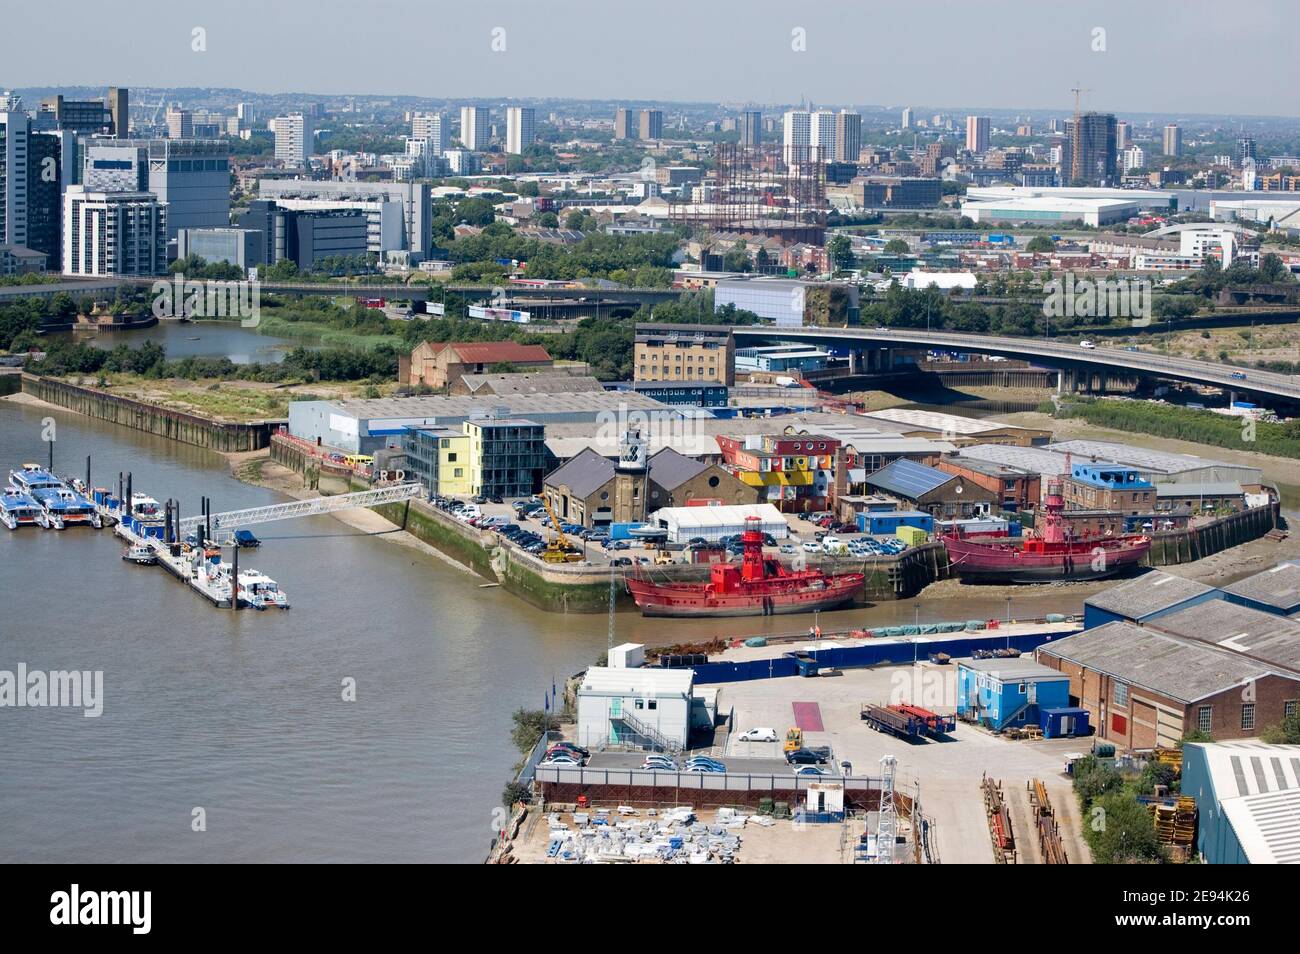 View from above of the River Thames and River Lea and the island with Trinity Buoy Wharf in Newham, East London. East India Dock basin behind View fro Stock Photo